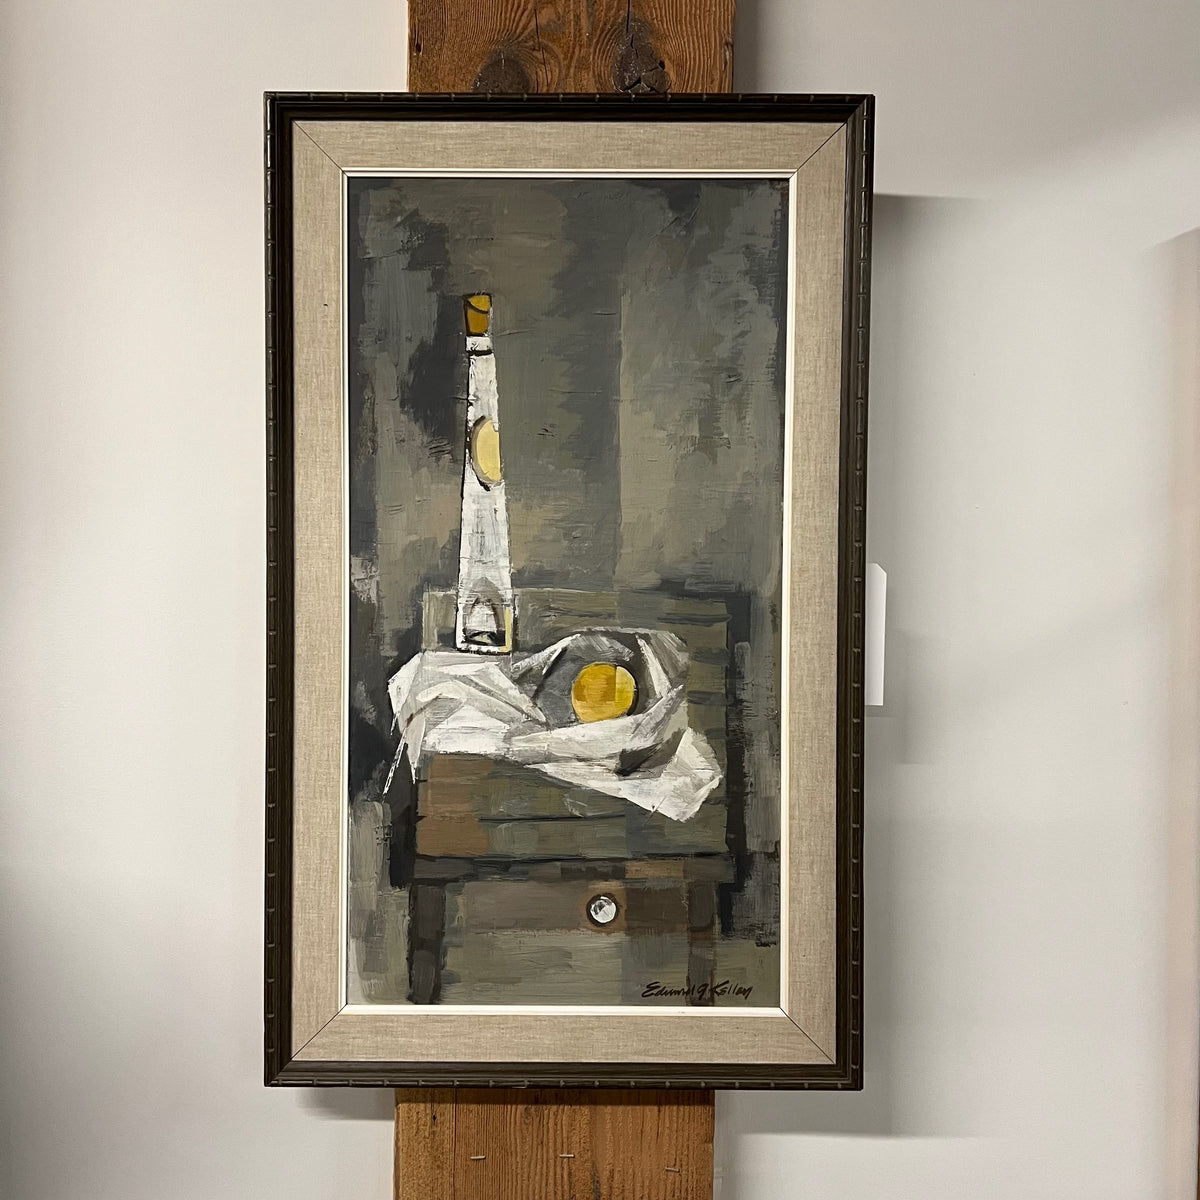 Still life painted by Chicago artist, Edward G Kelley. Kelley exhibited at the Art Institute in Chicago in the late 50's and 1960's.